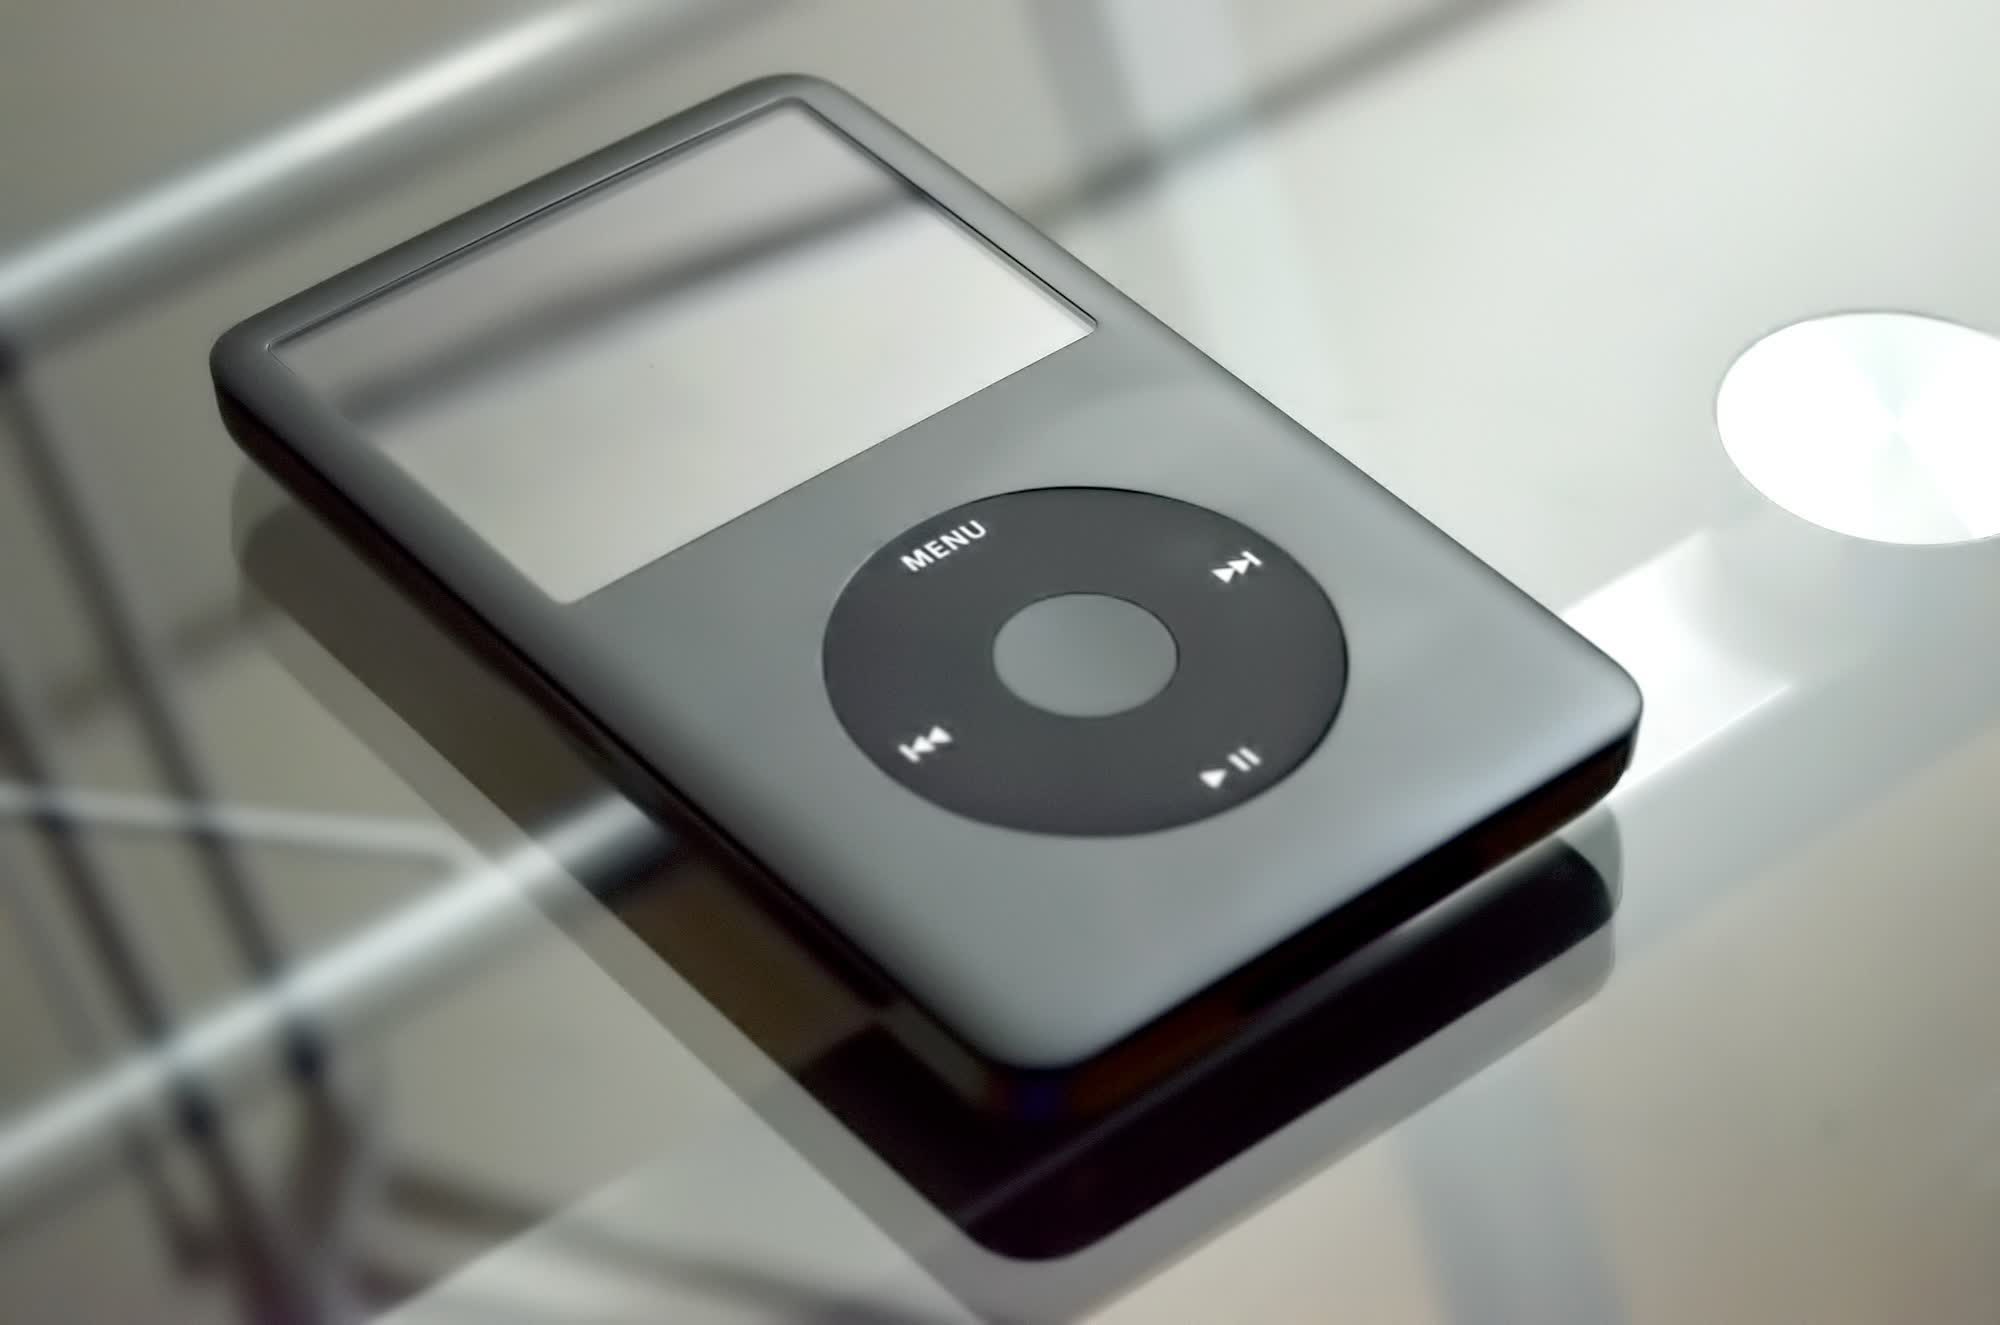 Apple discontinues the iPod after two decades